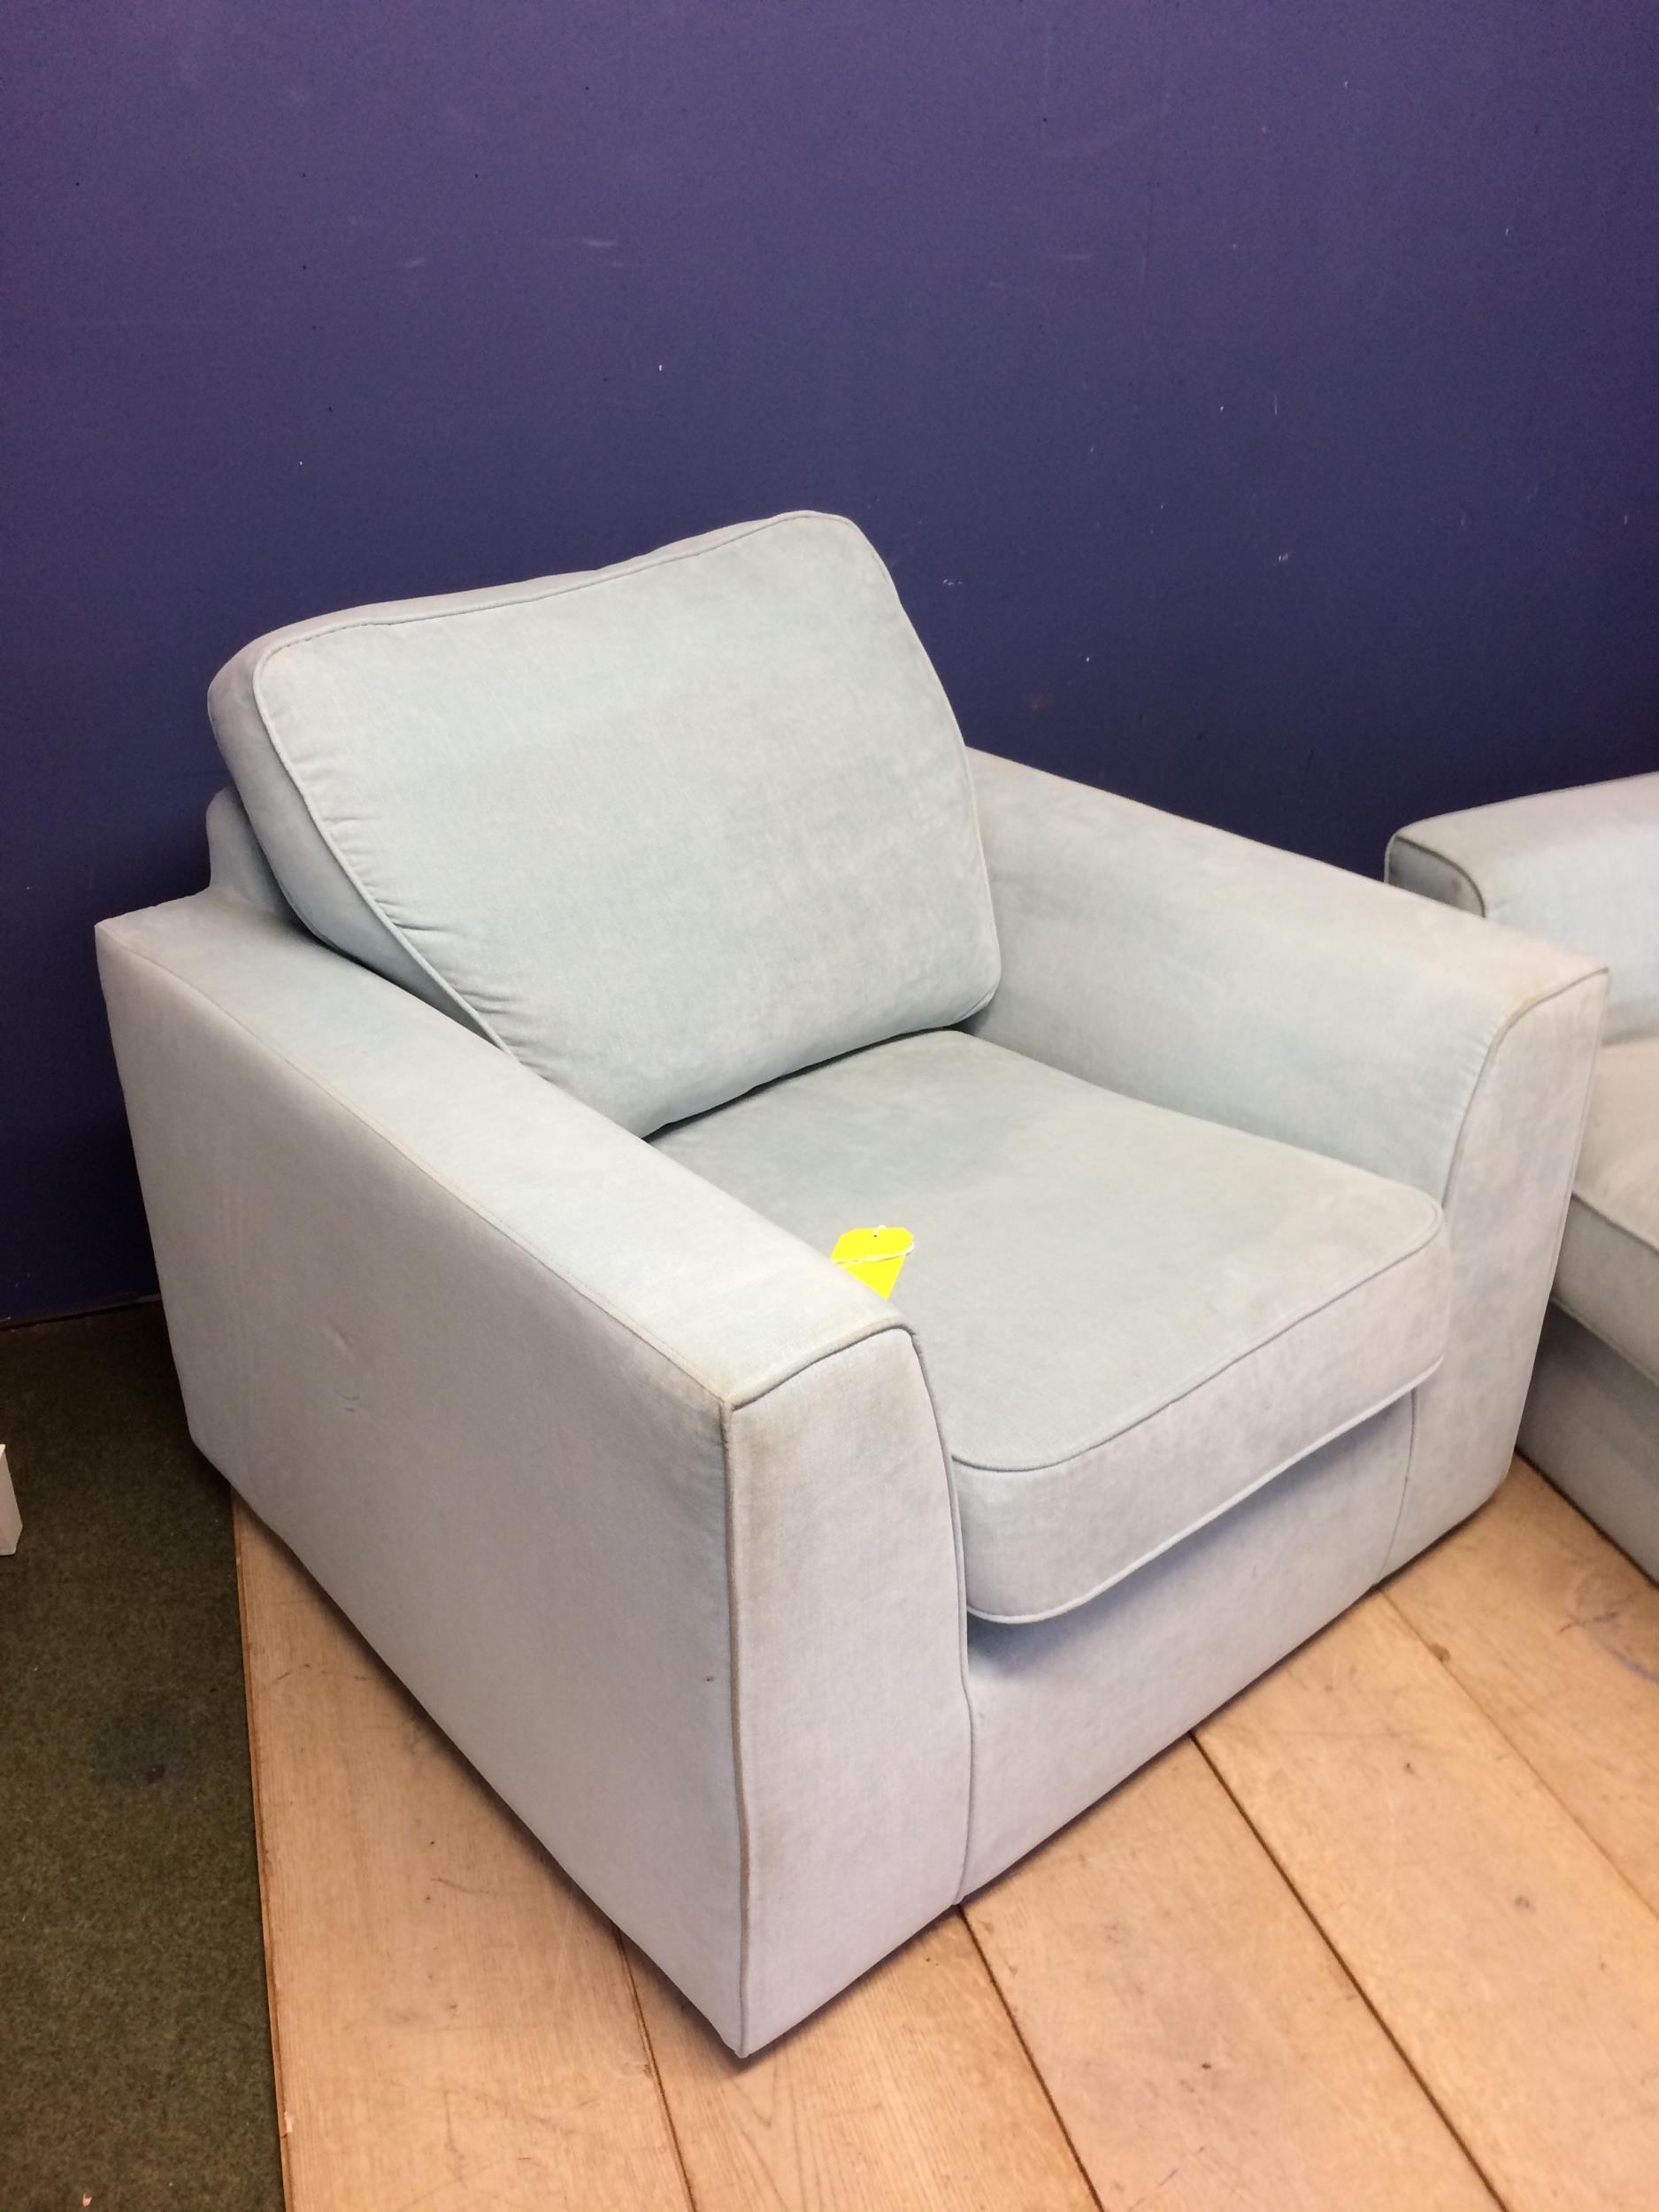 Duck egg blue sofa and chair (in used condition - upholstery needs some cleaning) note one black - Image 2 of 2